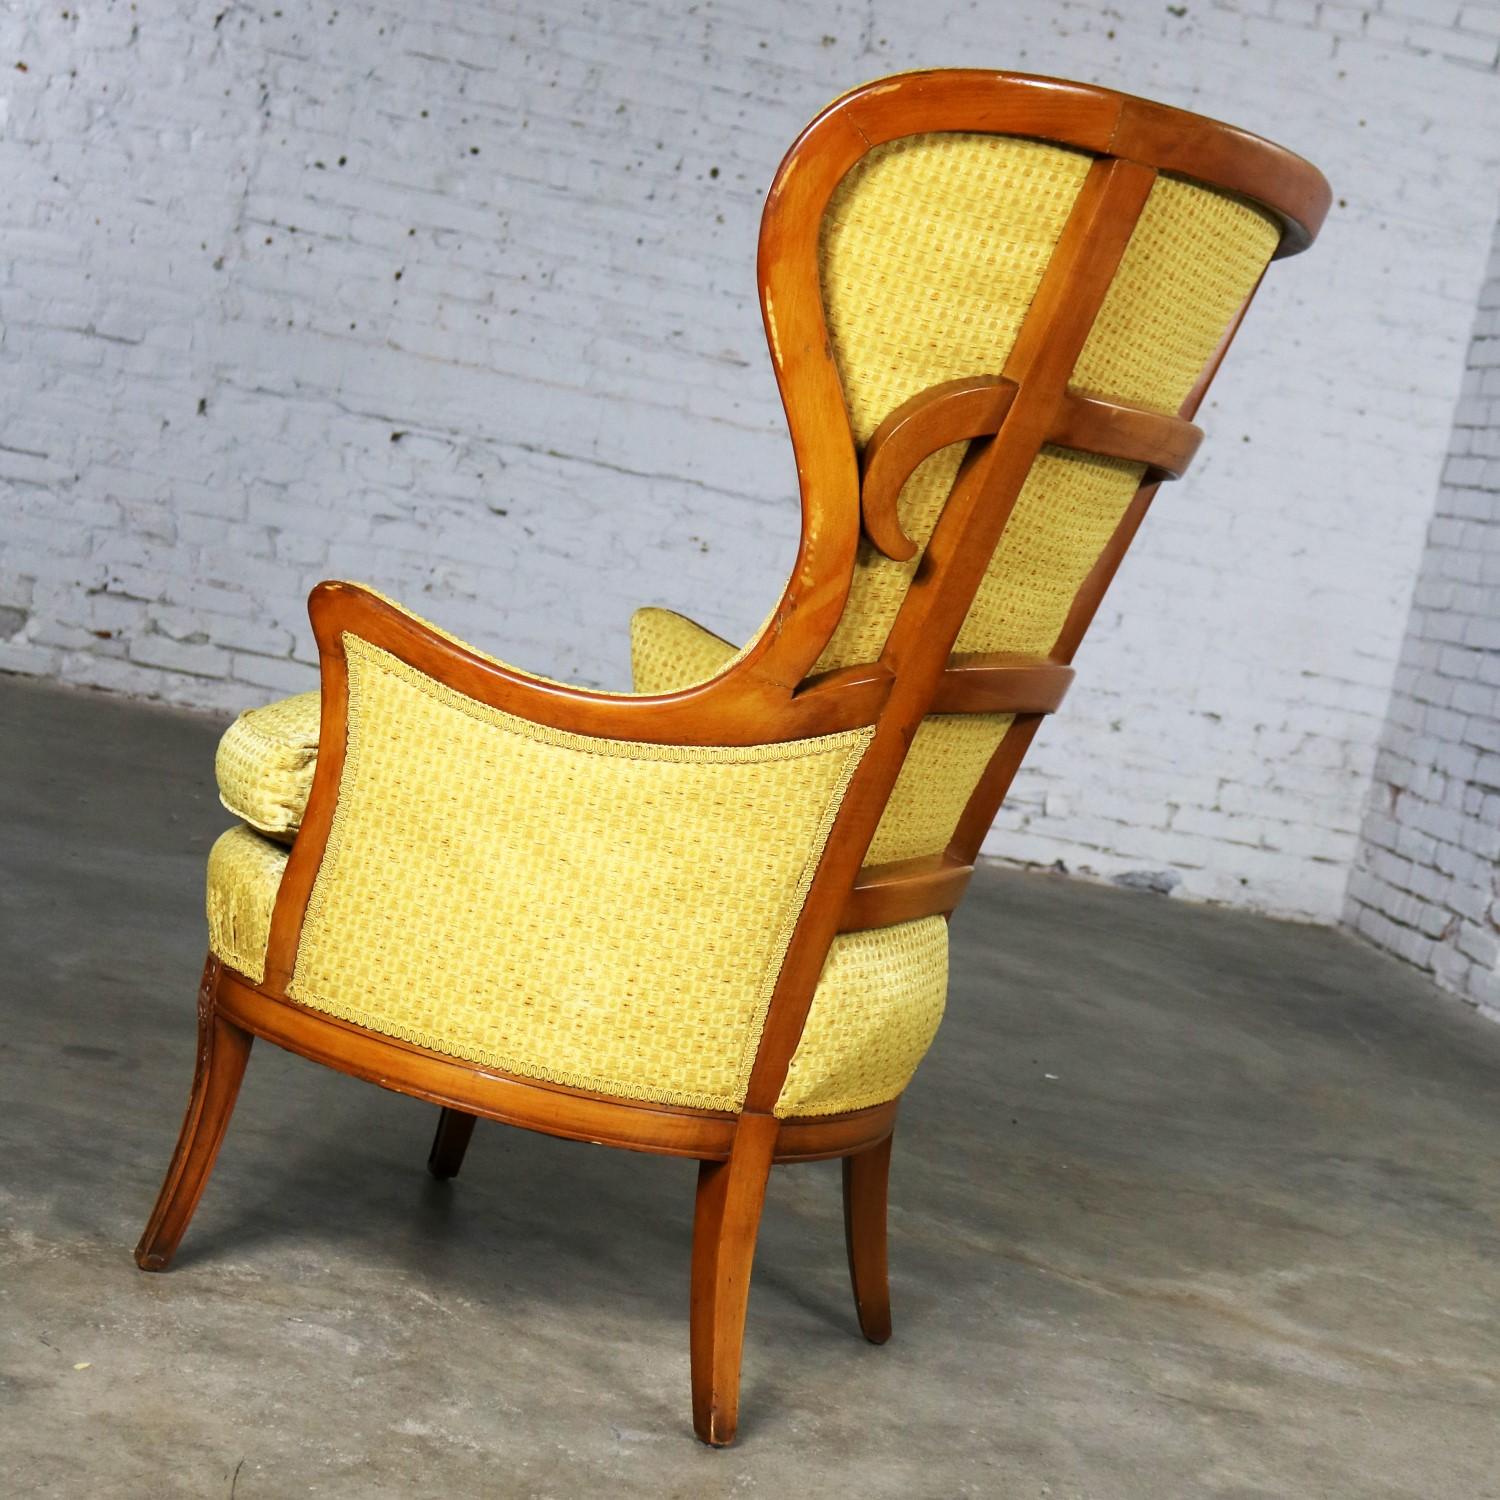 20th Century Art Deco Style High Wingback Lounge Chair from John M. Smyth Company Chicago